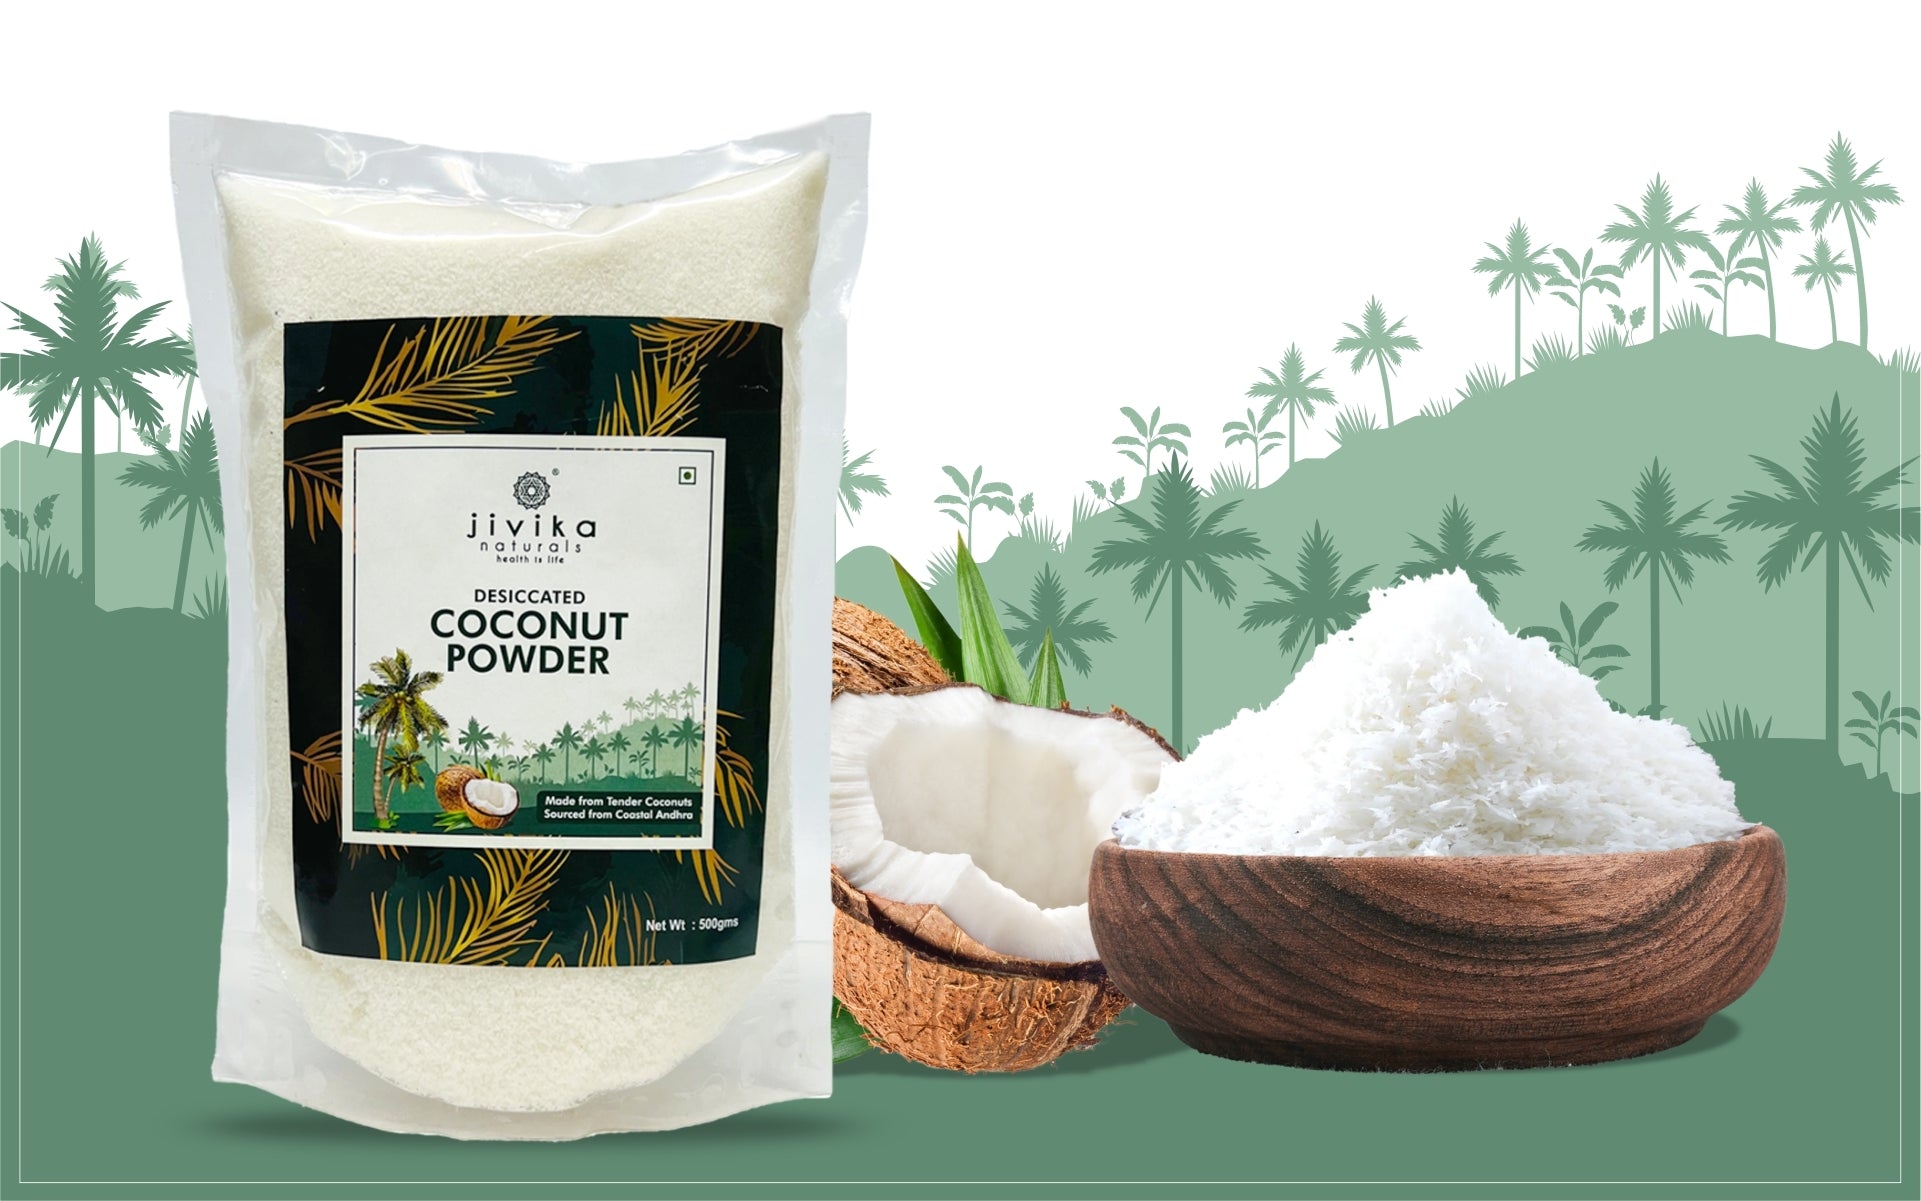 What is Desiccated Coconut Powder and is it good for you?